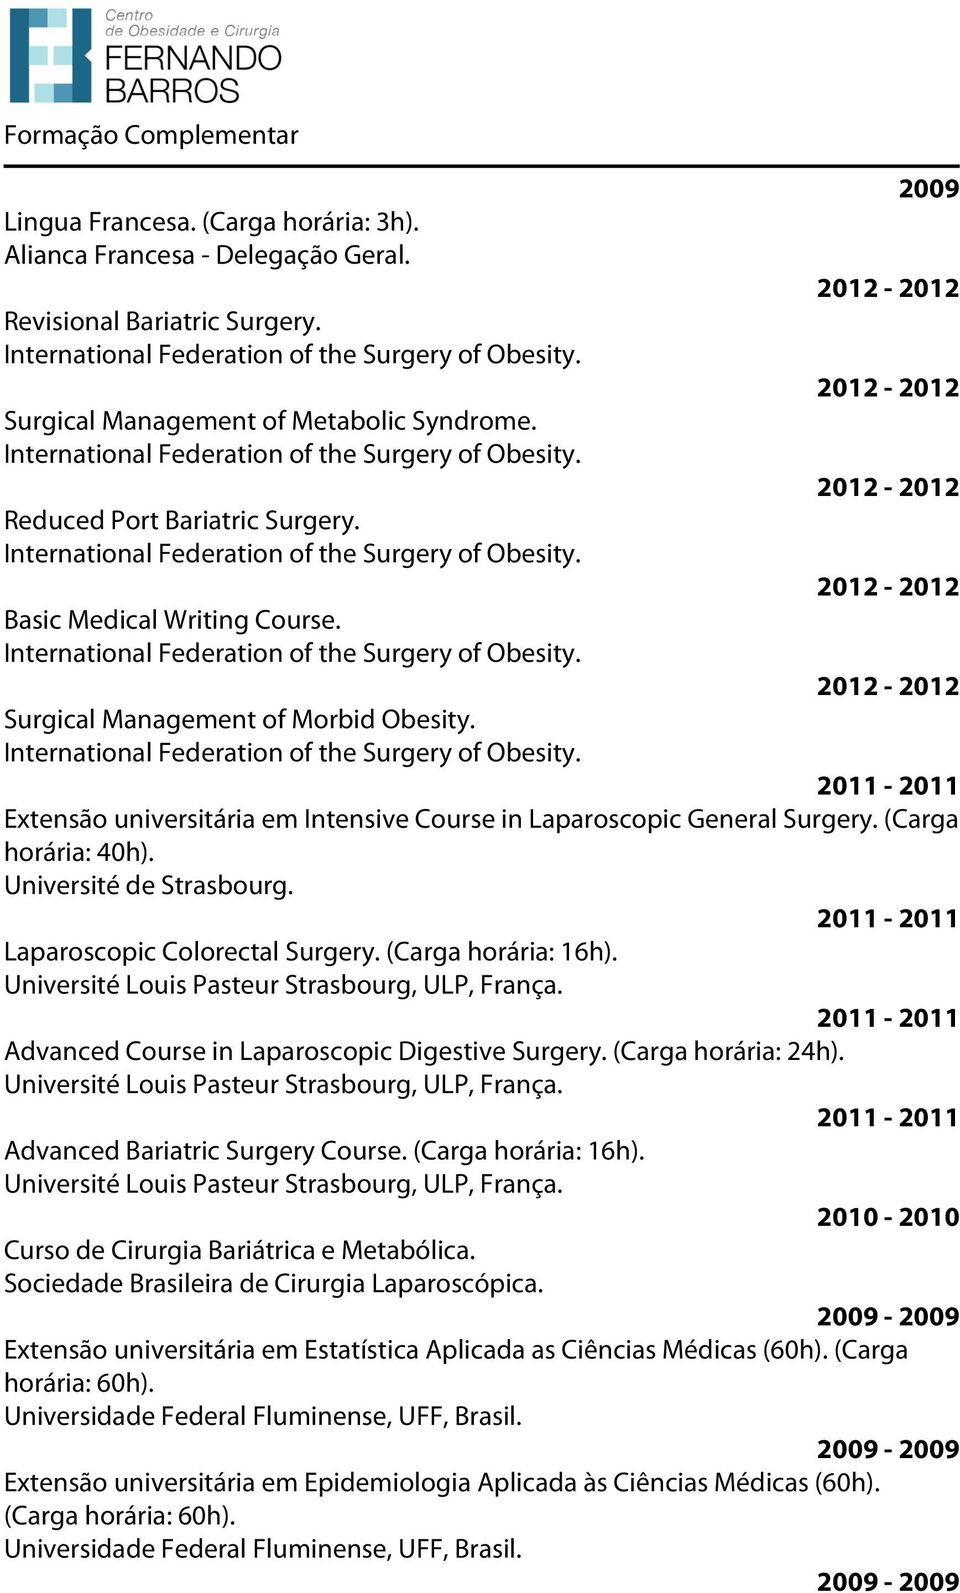 International Federation of the Surgery of Obesity. 2009 2012-2012 2012-2012 2012-2012 2012-2012 2012-2012 Surgical Management of Morbid Obesity. International Federation of the Surgery of Obesity.